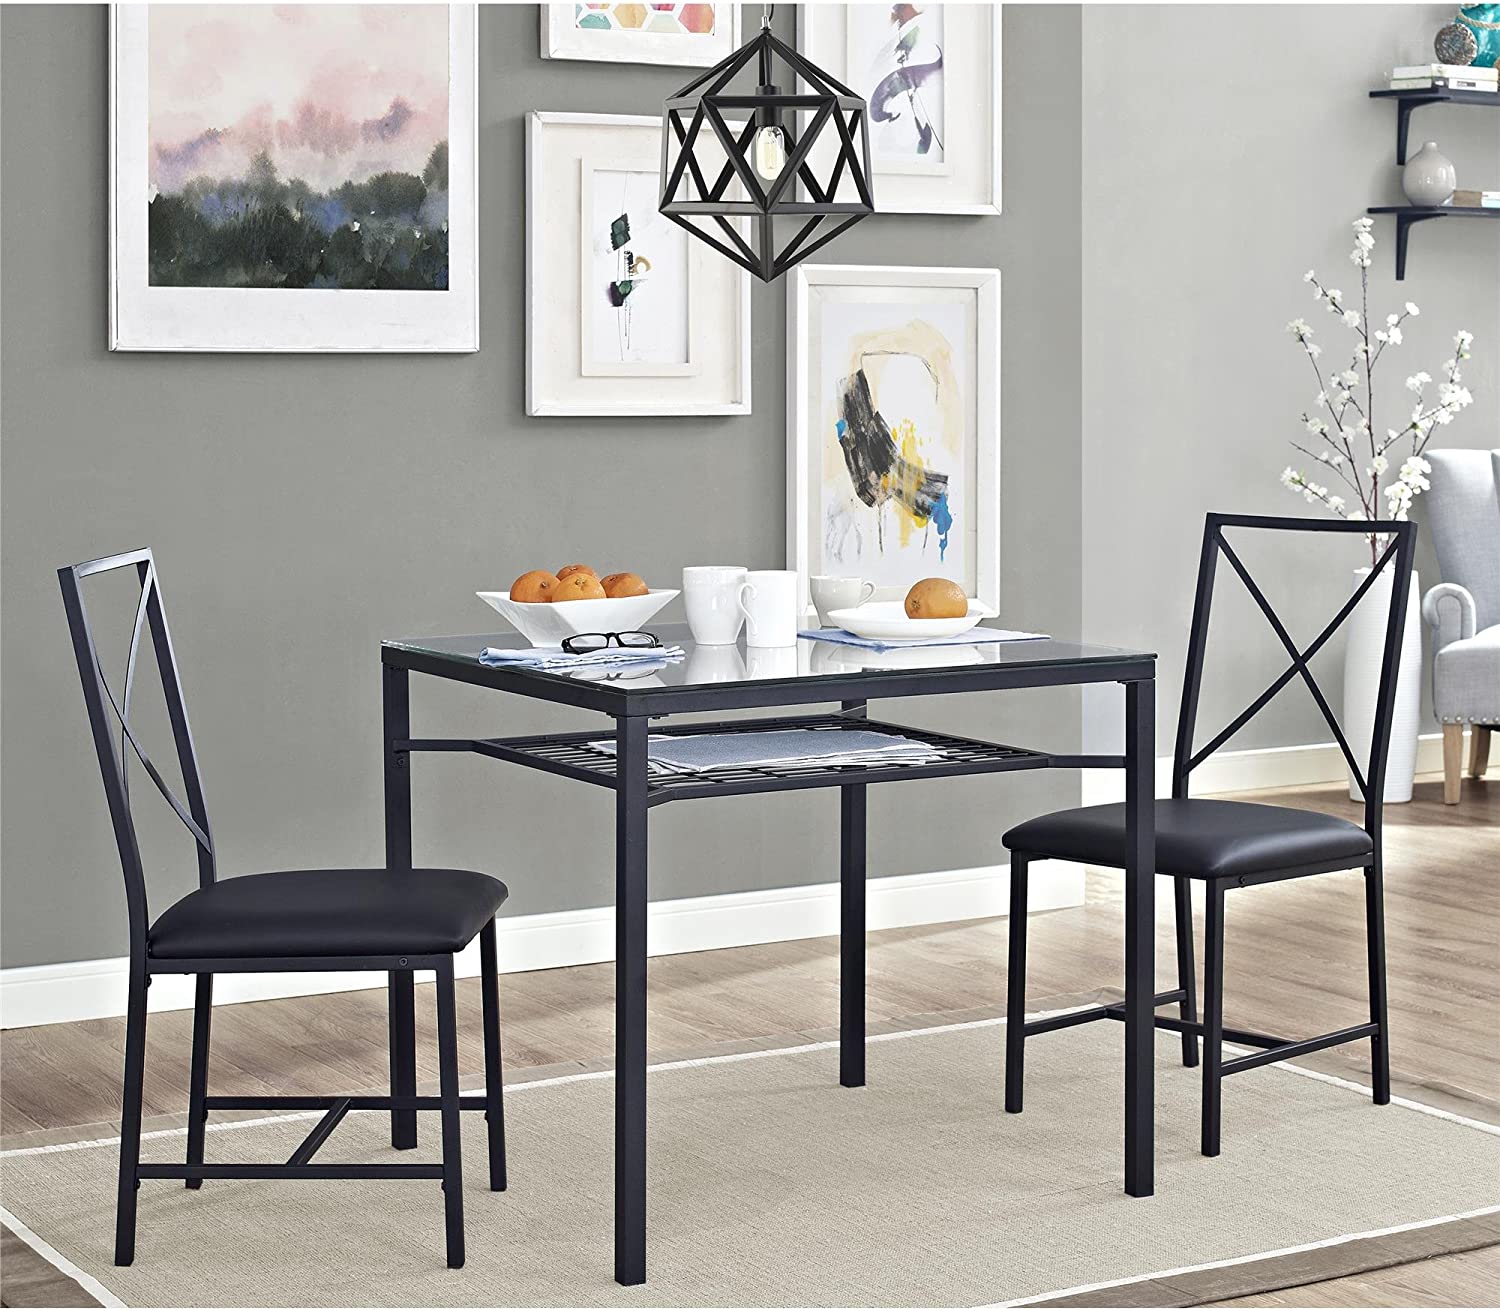 Modern Glass Top Dining Table Set 2 Chairs Dining Room Furniture Square Dining Table